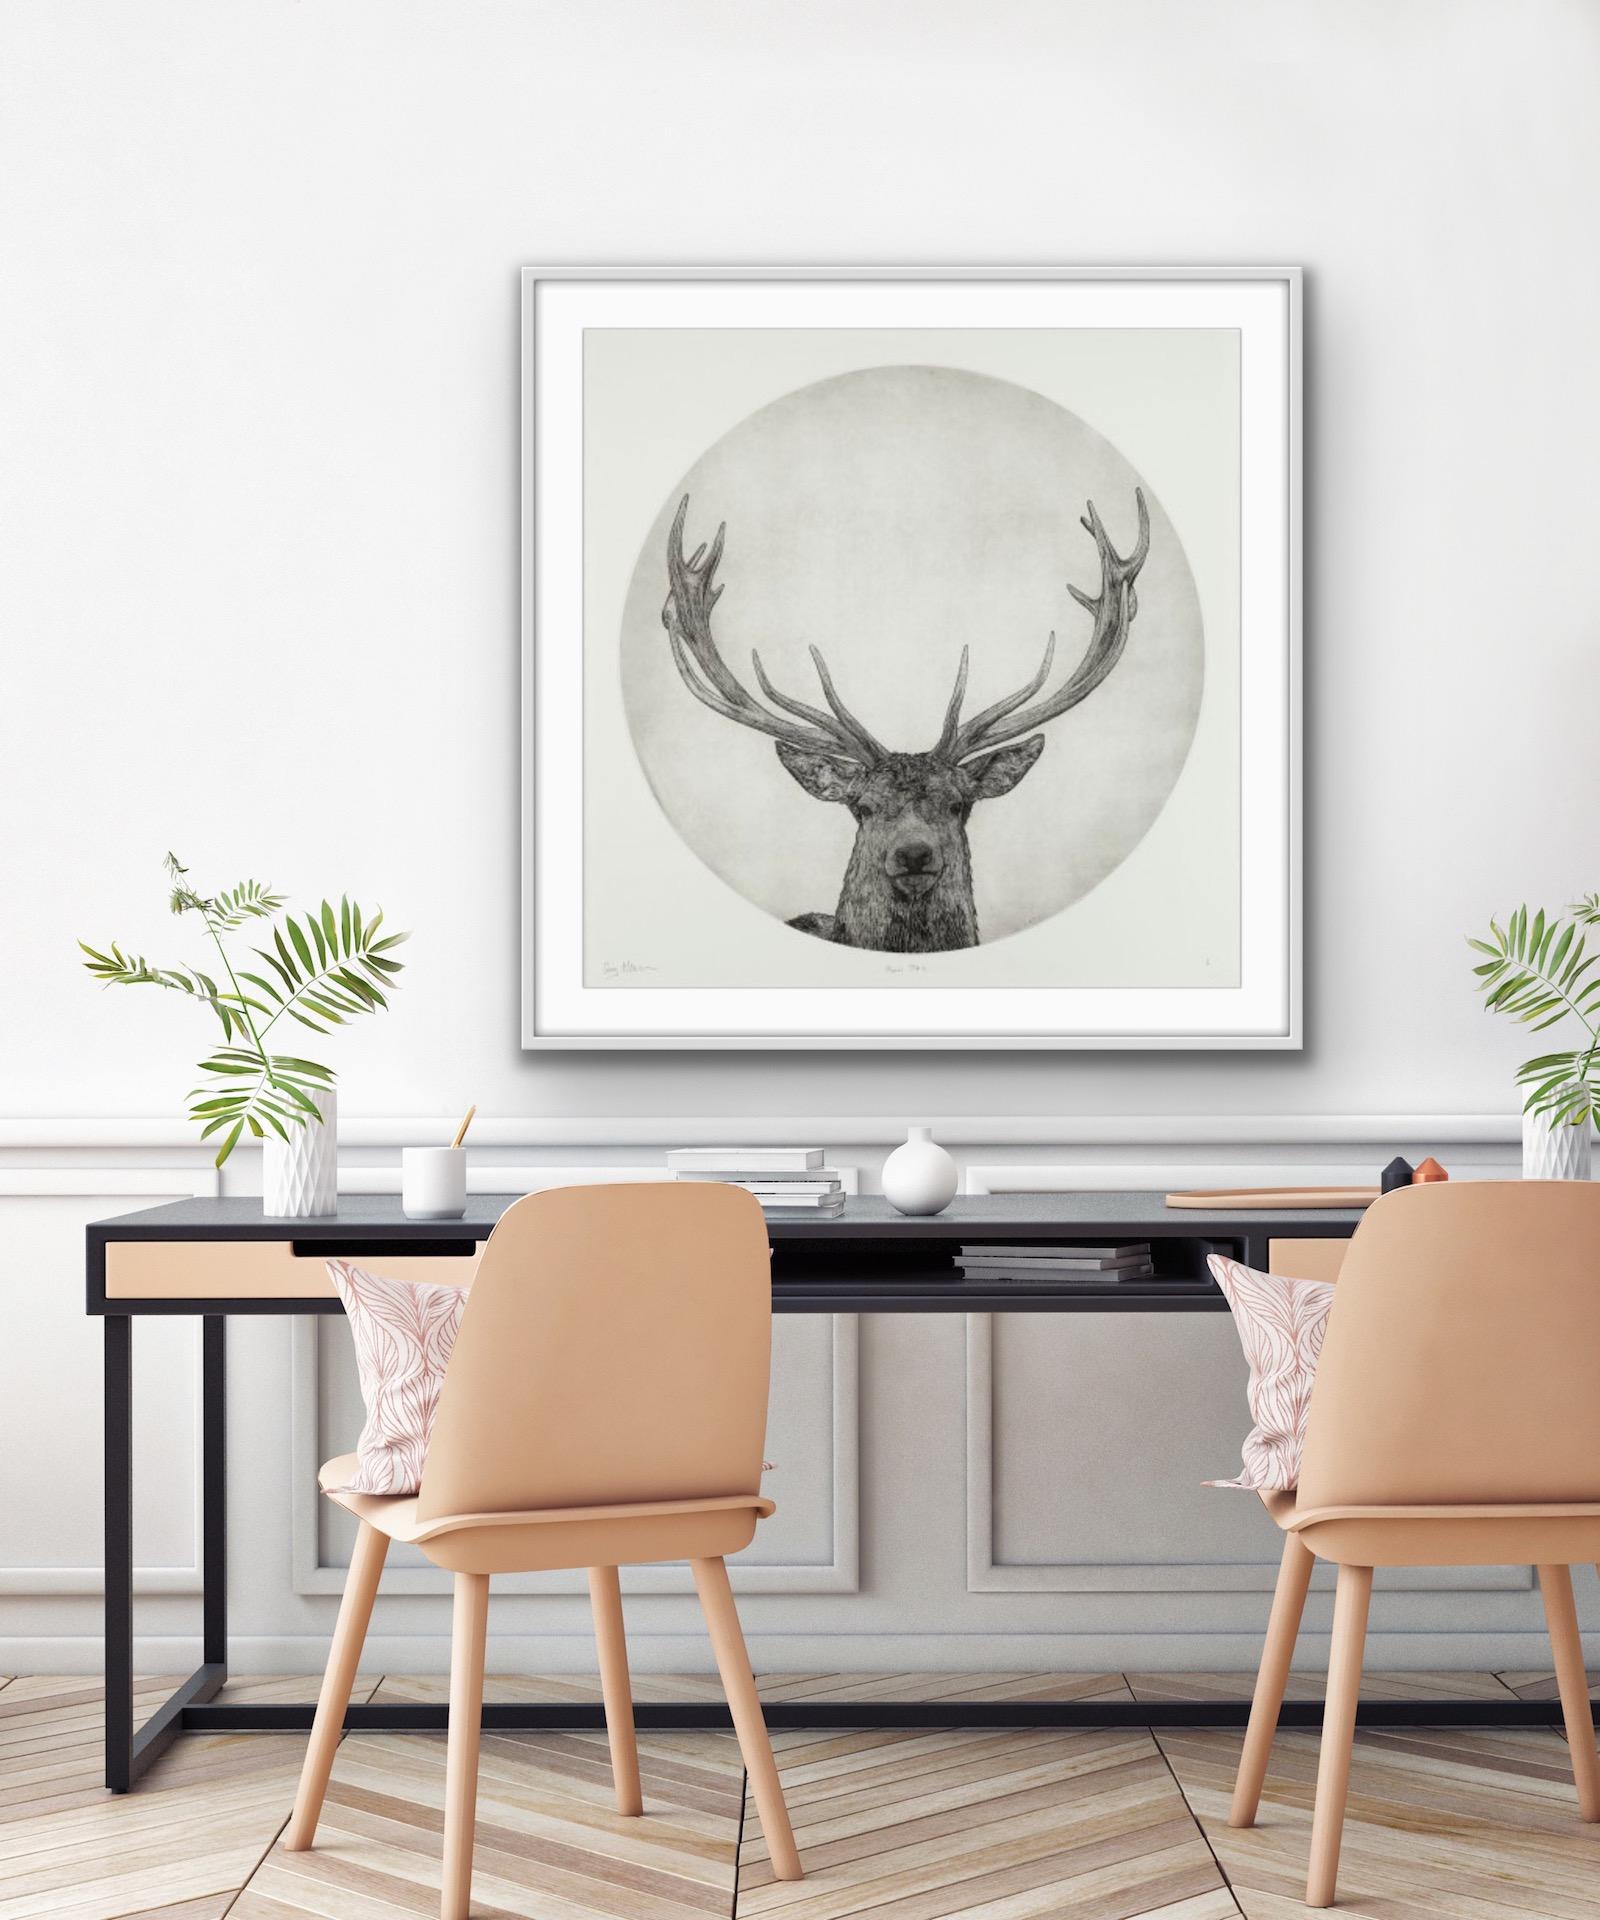 Guy Allen
Moon Stag
Image size: 79cm diameter
Size: H:86 cm x W:86 cm
Medium: etching
Edition size: 75
Year completed: 2019
Sold unframed
Please note that in situ images are purely an indication of how a piece may look.

Moon Stag is an original